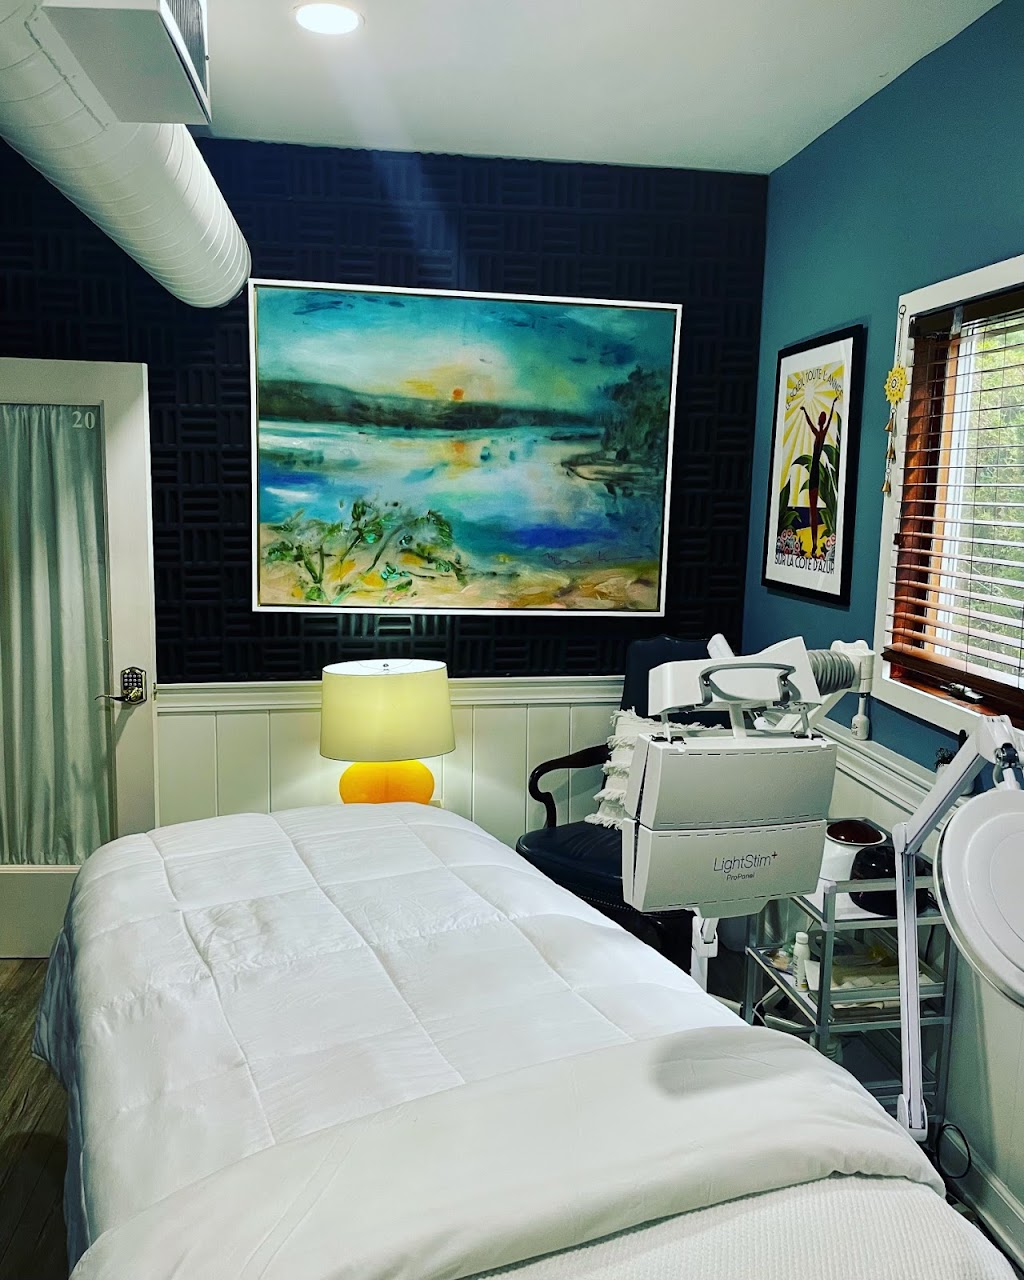 Soleil Skincare Atelier | 3 Harbor Rd, Cold Spring Harbor, NY 11724 | Phone: (516) 884-8760